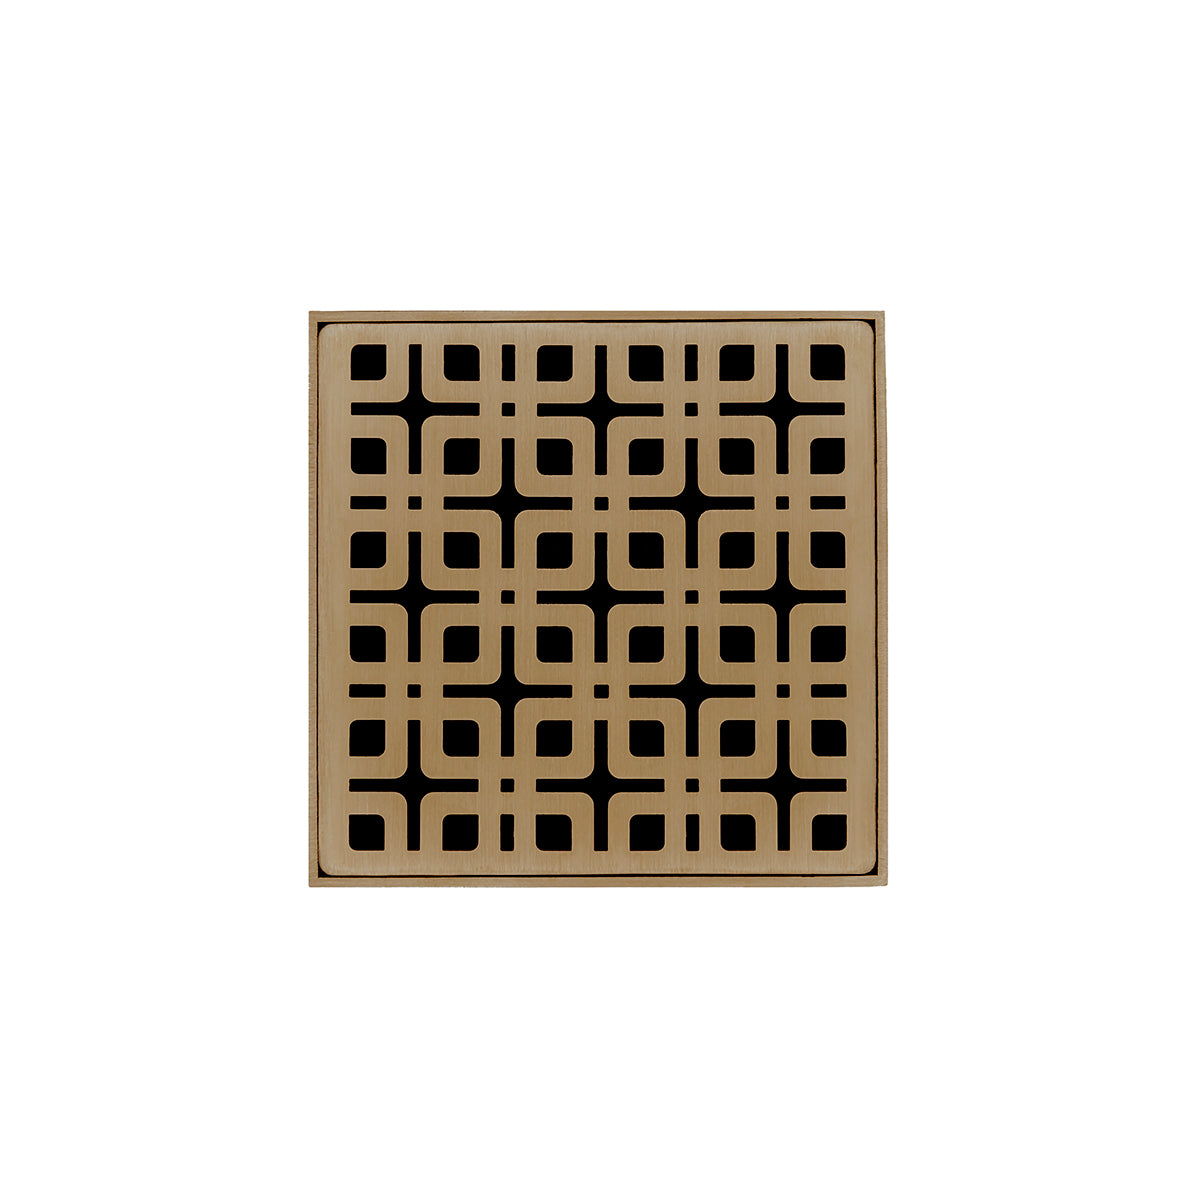 Infinity Drain 4" x 4" KD 4 Premium Center Drain Kit with Link Pattern Decorative Plate with ABS Drain Body, 2" Outlet